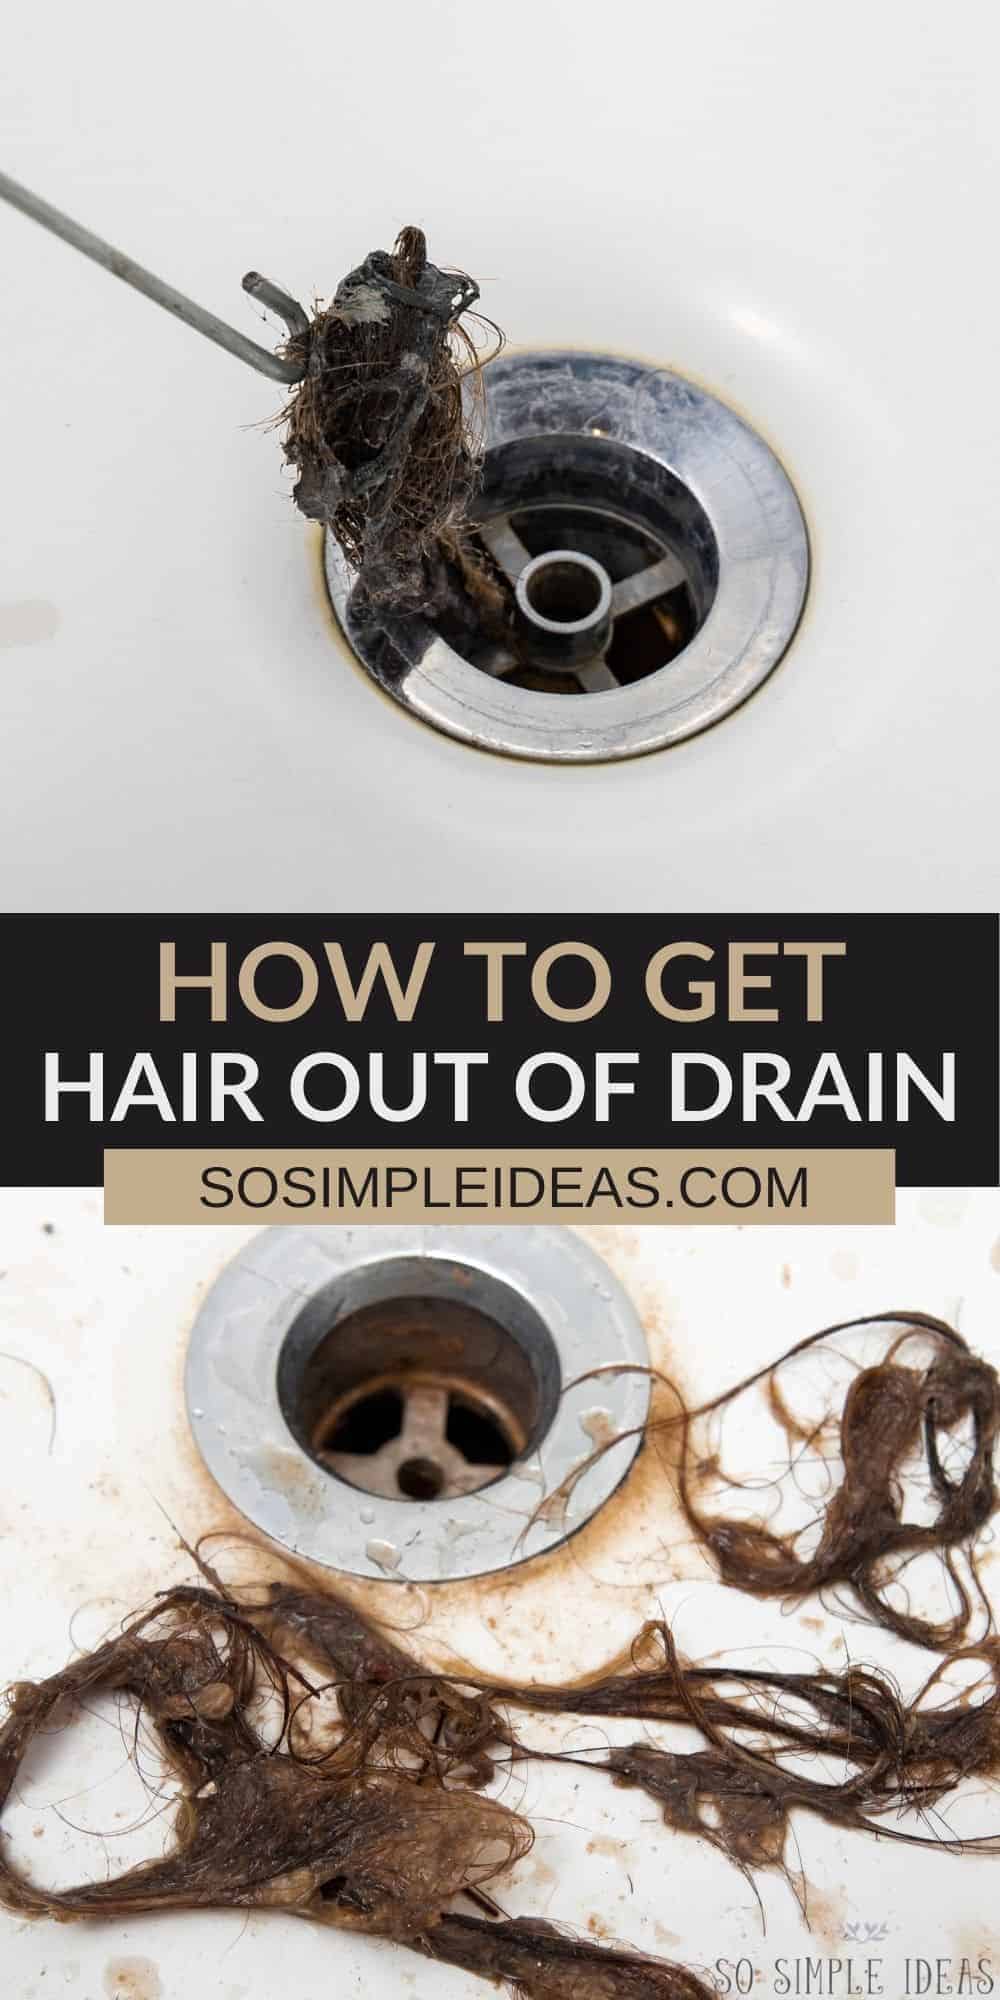 how to get hair out of drain pinterest image.